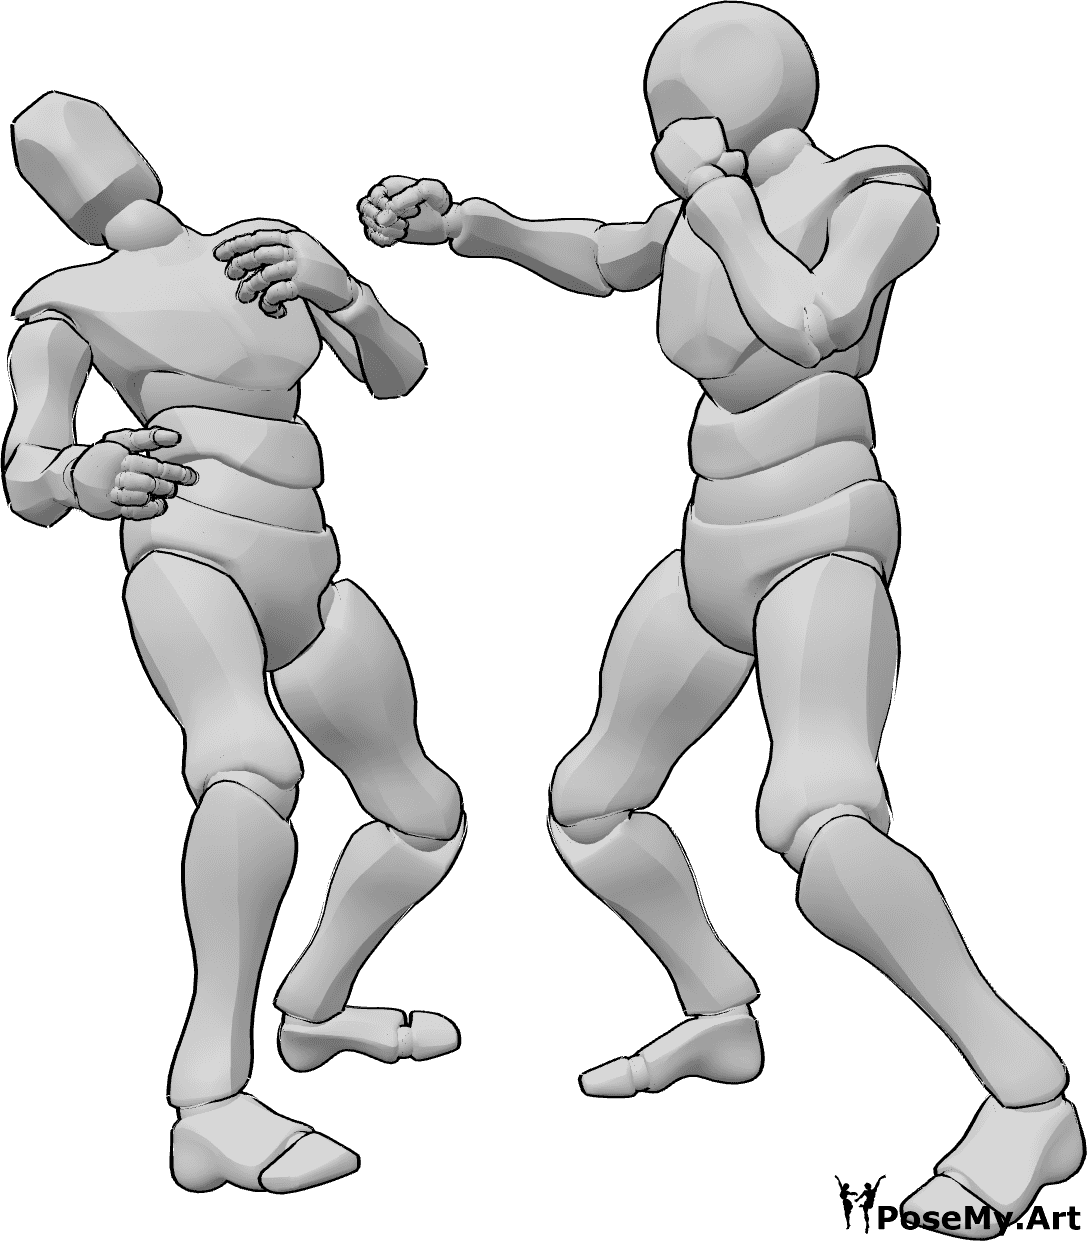 Pose Reference- Box knocking out pose - Two males are boxing, one of them knocks out his opponent with a right hook